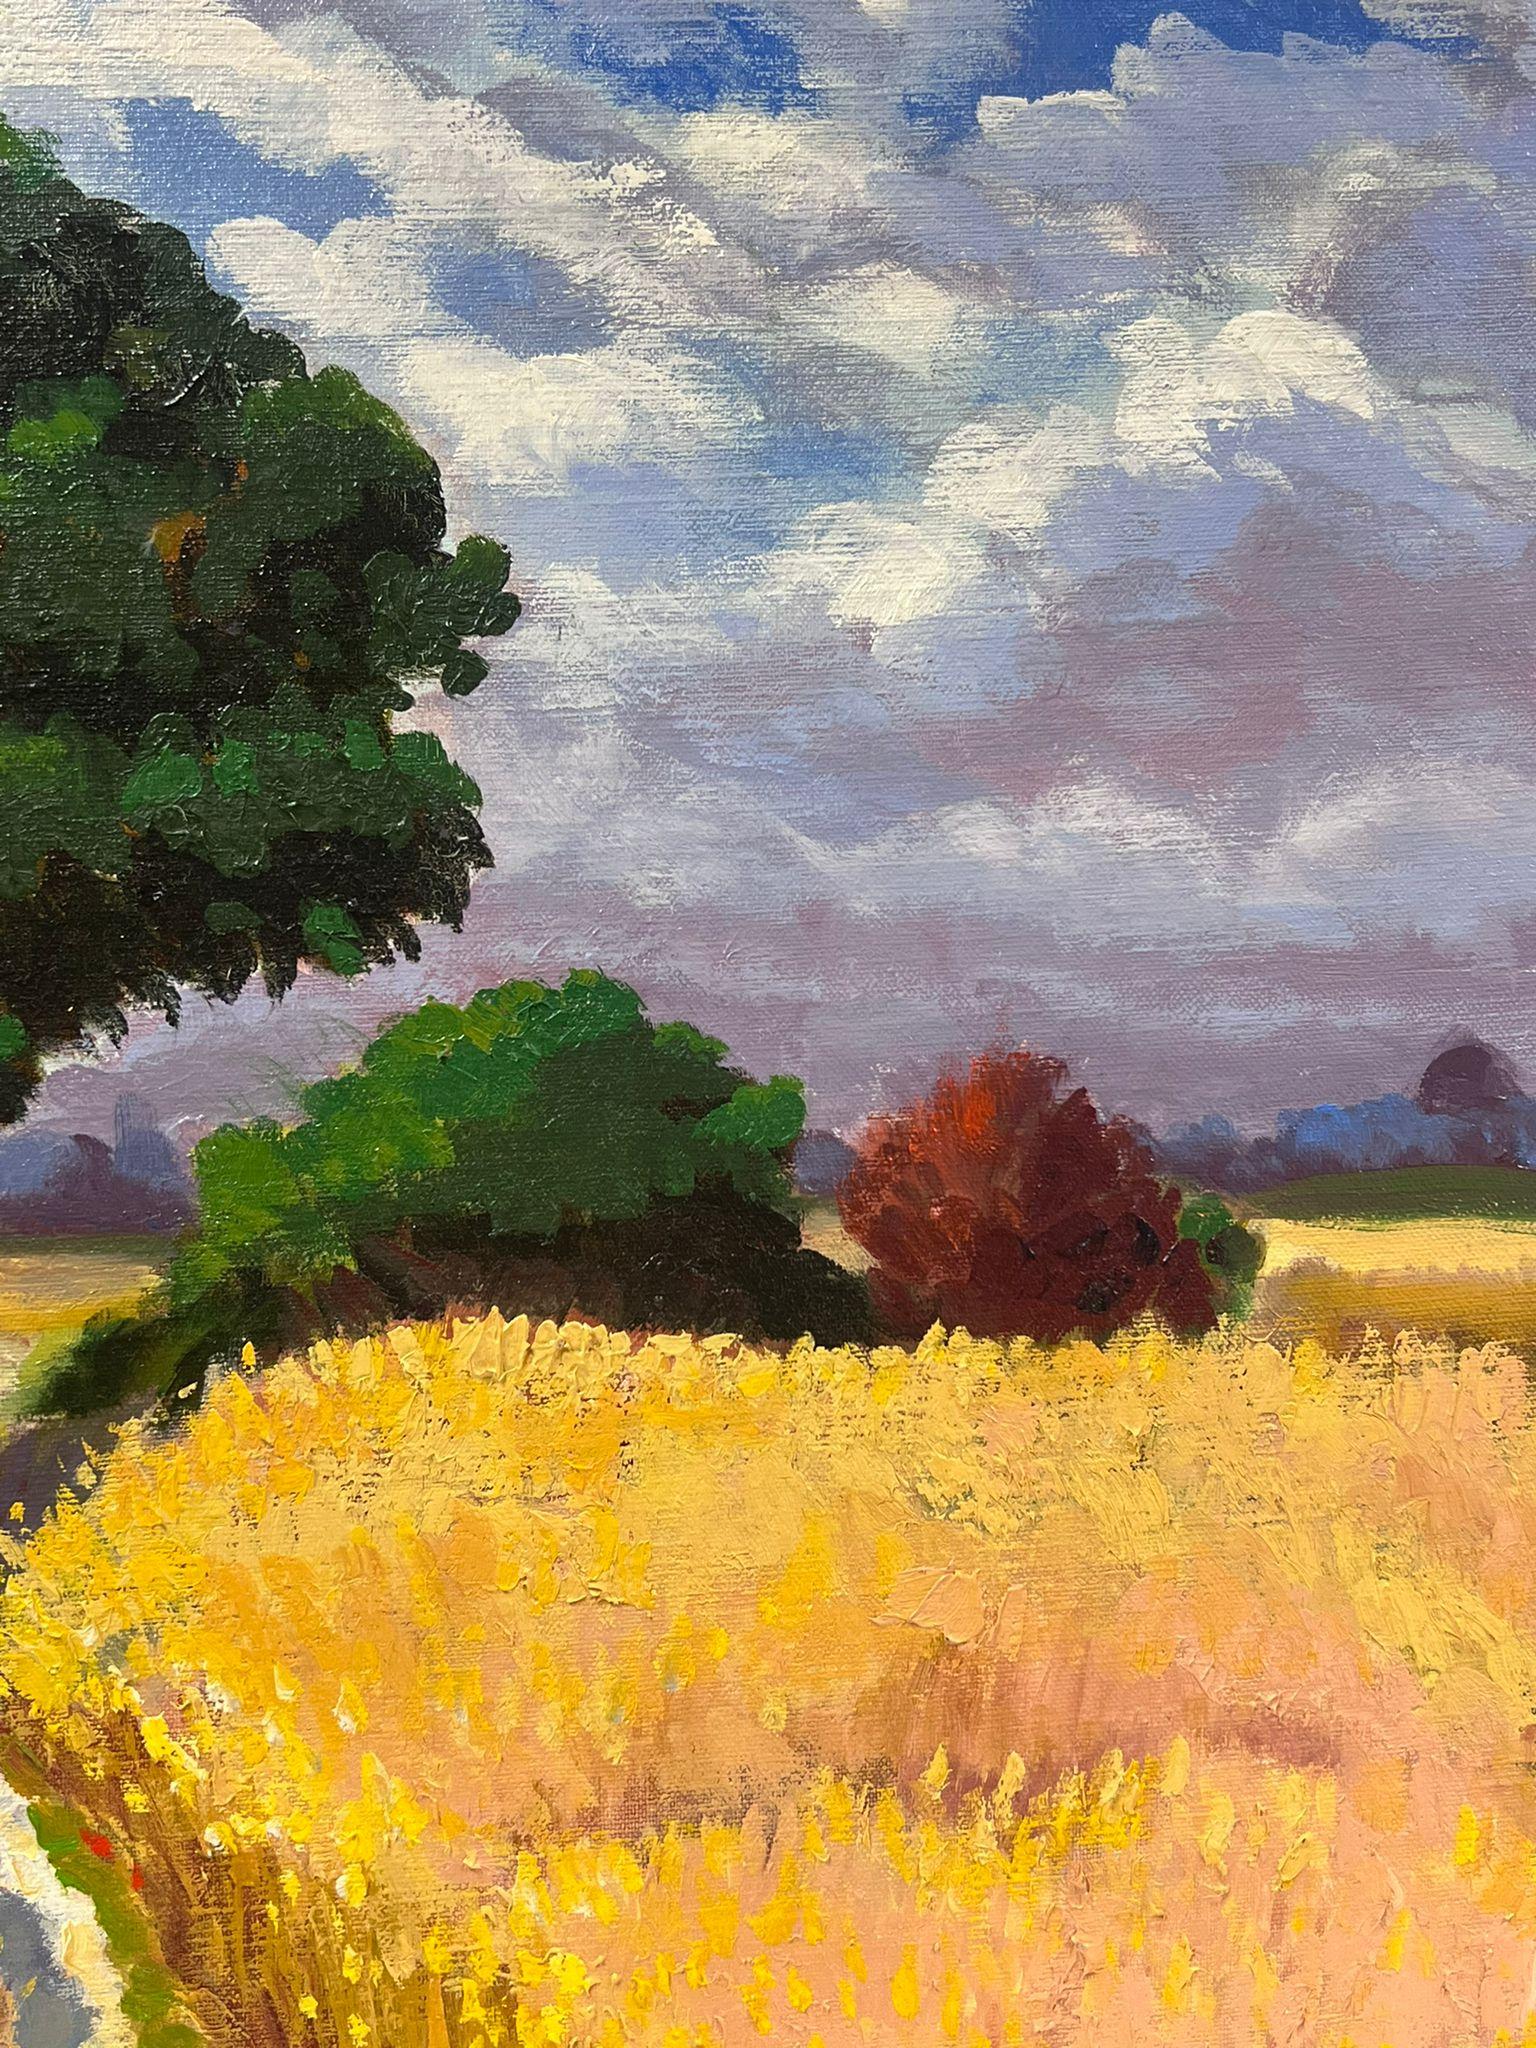 Golden Wheat Fields
by Georges Bordonave (French contemporary)  
signed oil painting on canvas, unframed
dated 1996
unframed: 20 x 24 inches
condition: very good
provenance: from a large private collection of this artists work, western Paris,